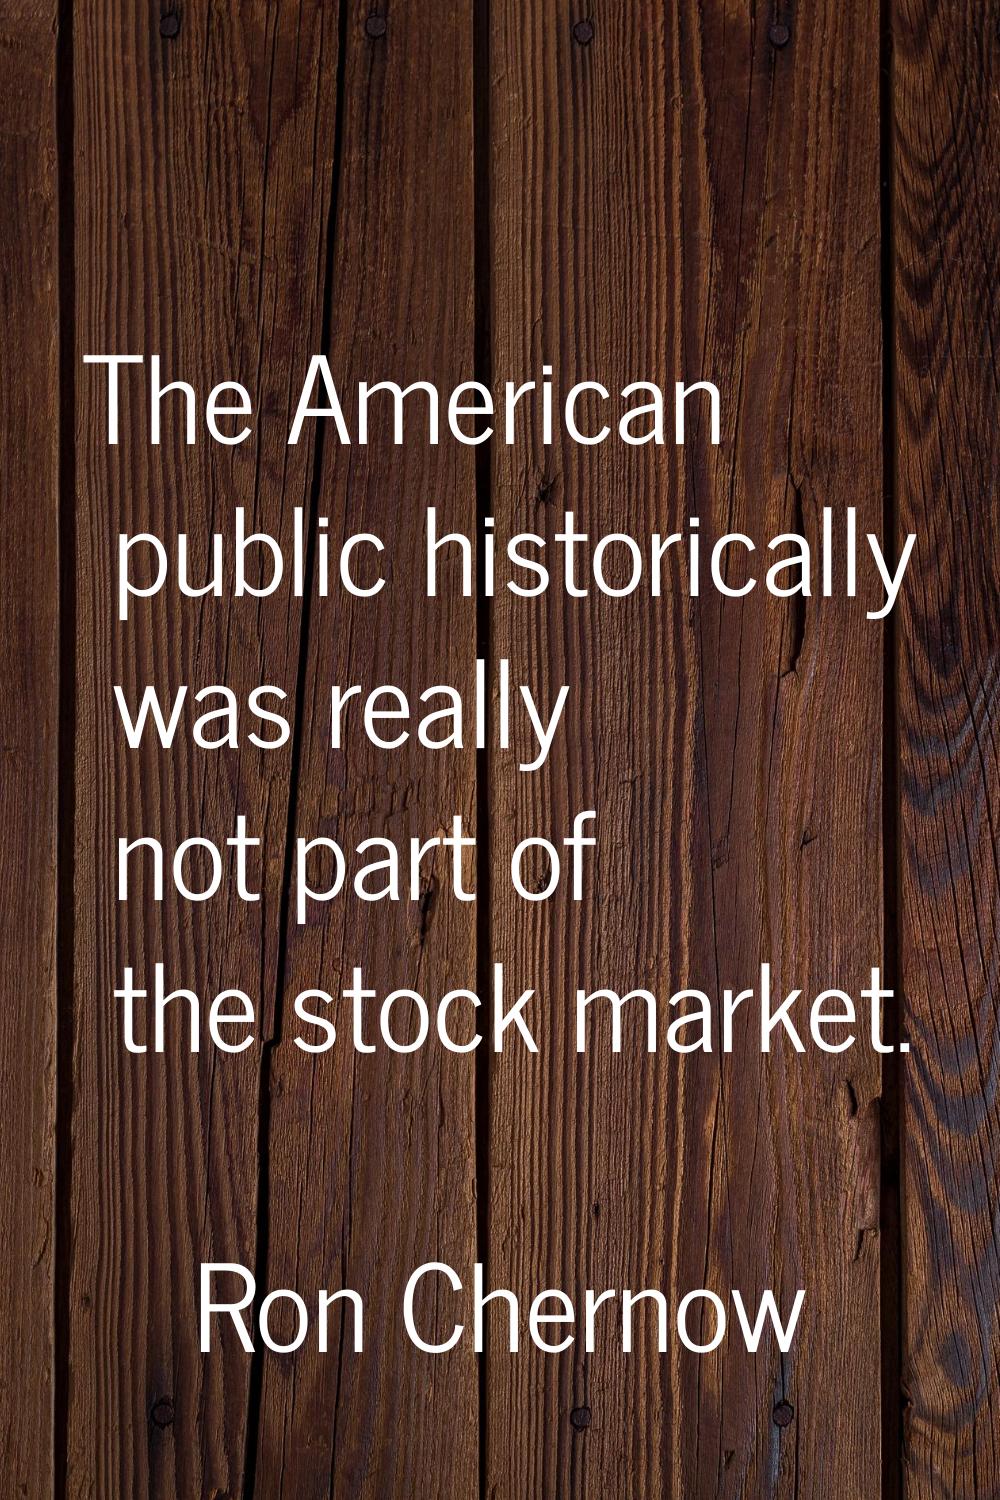 The American public historically was really not part of the stock market.